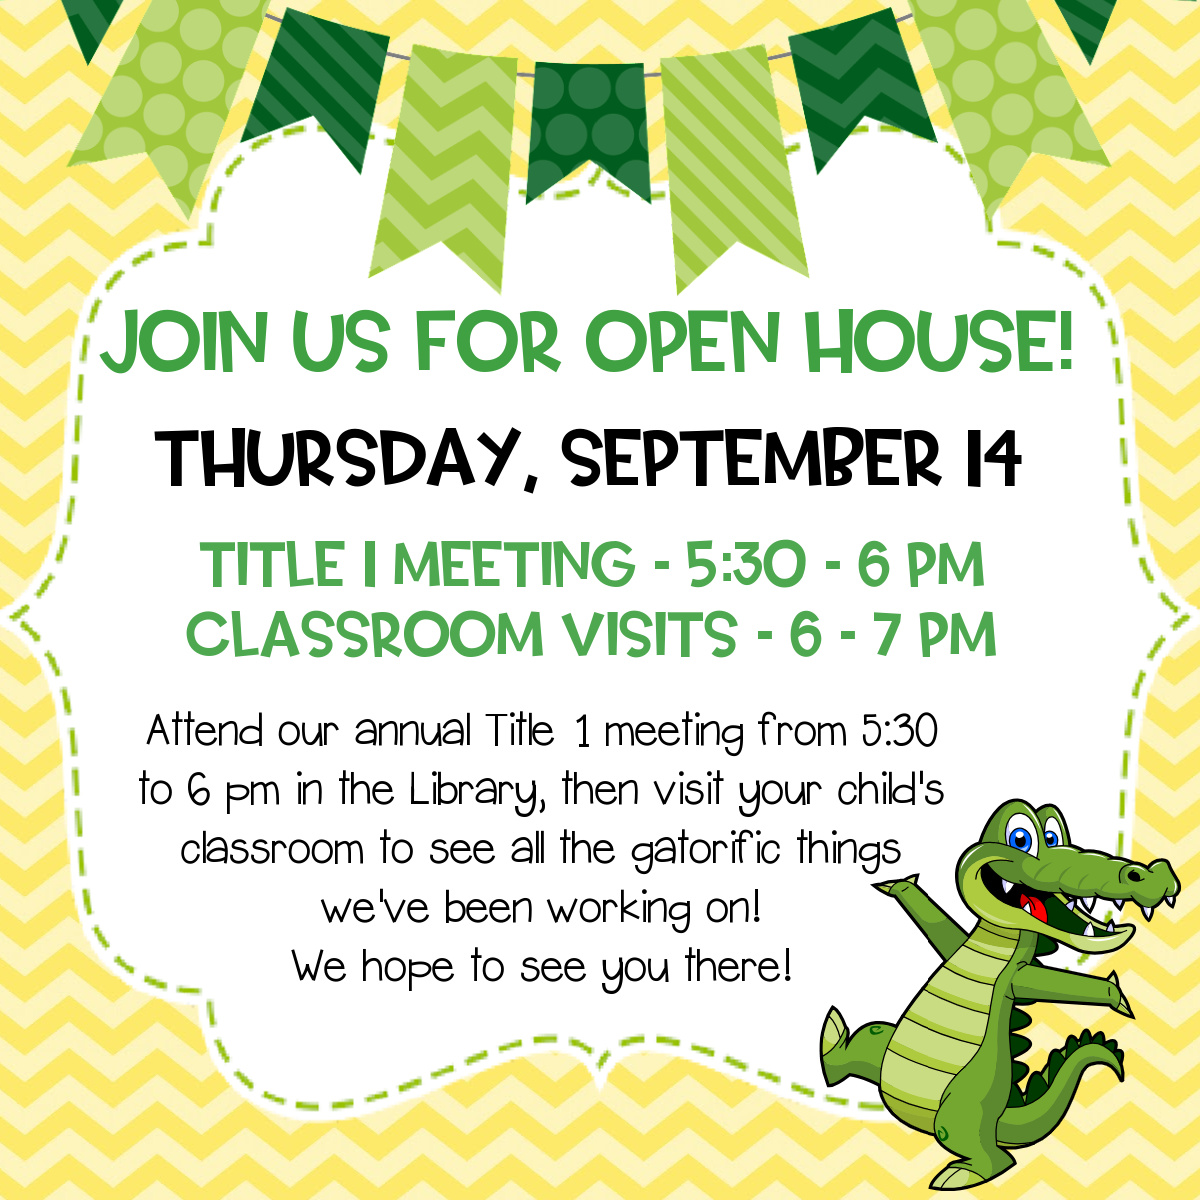 Hey Gators! Join us for Open House & our annual Title 1 Meeting on Thursday, September 14! The Title 1 meeting will be held in the library from 5:30 - 6 pm, followed by our regular Open House activities from 6 to 7 pm. We hope to see you there!